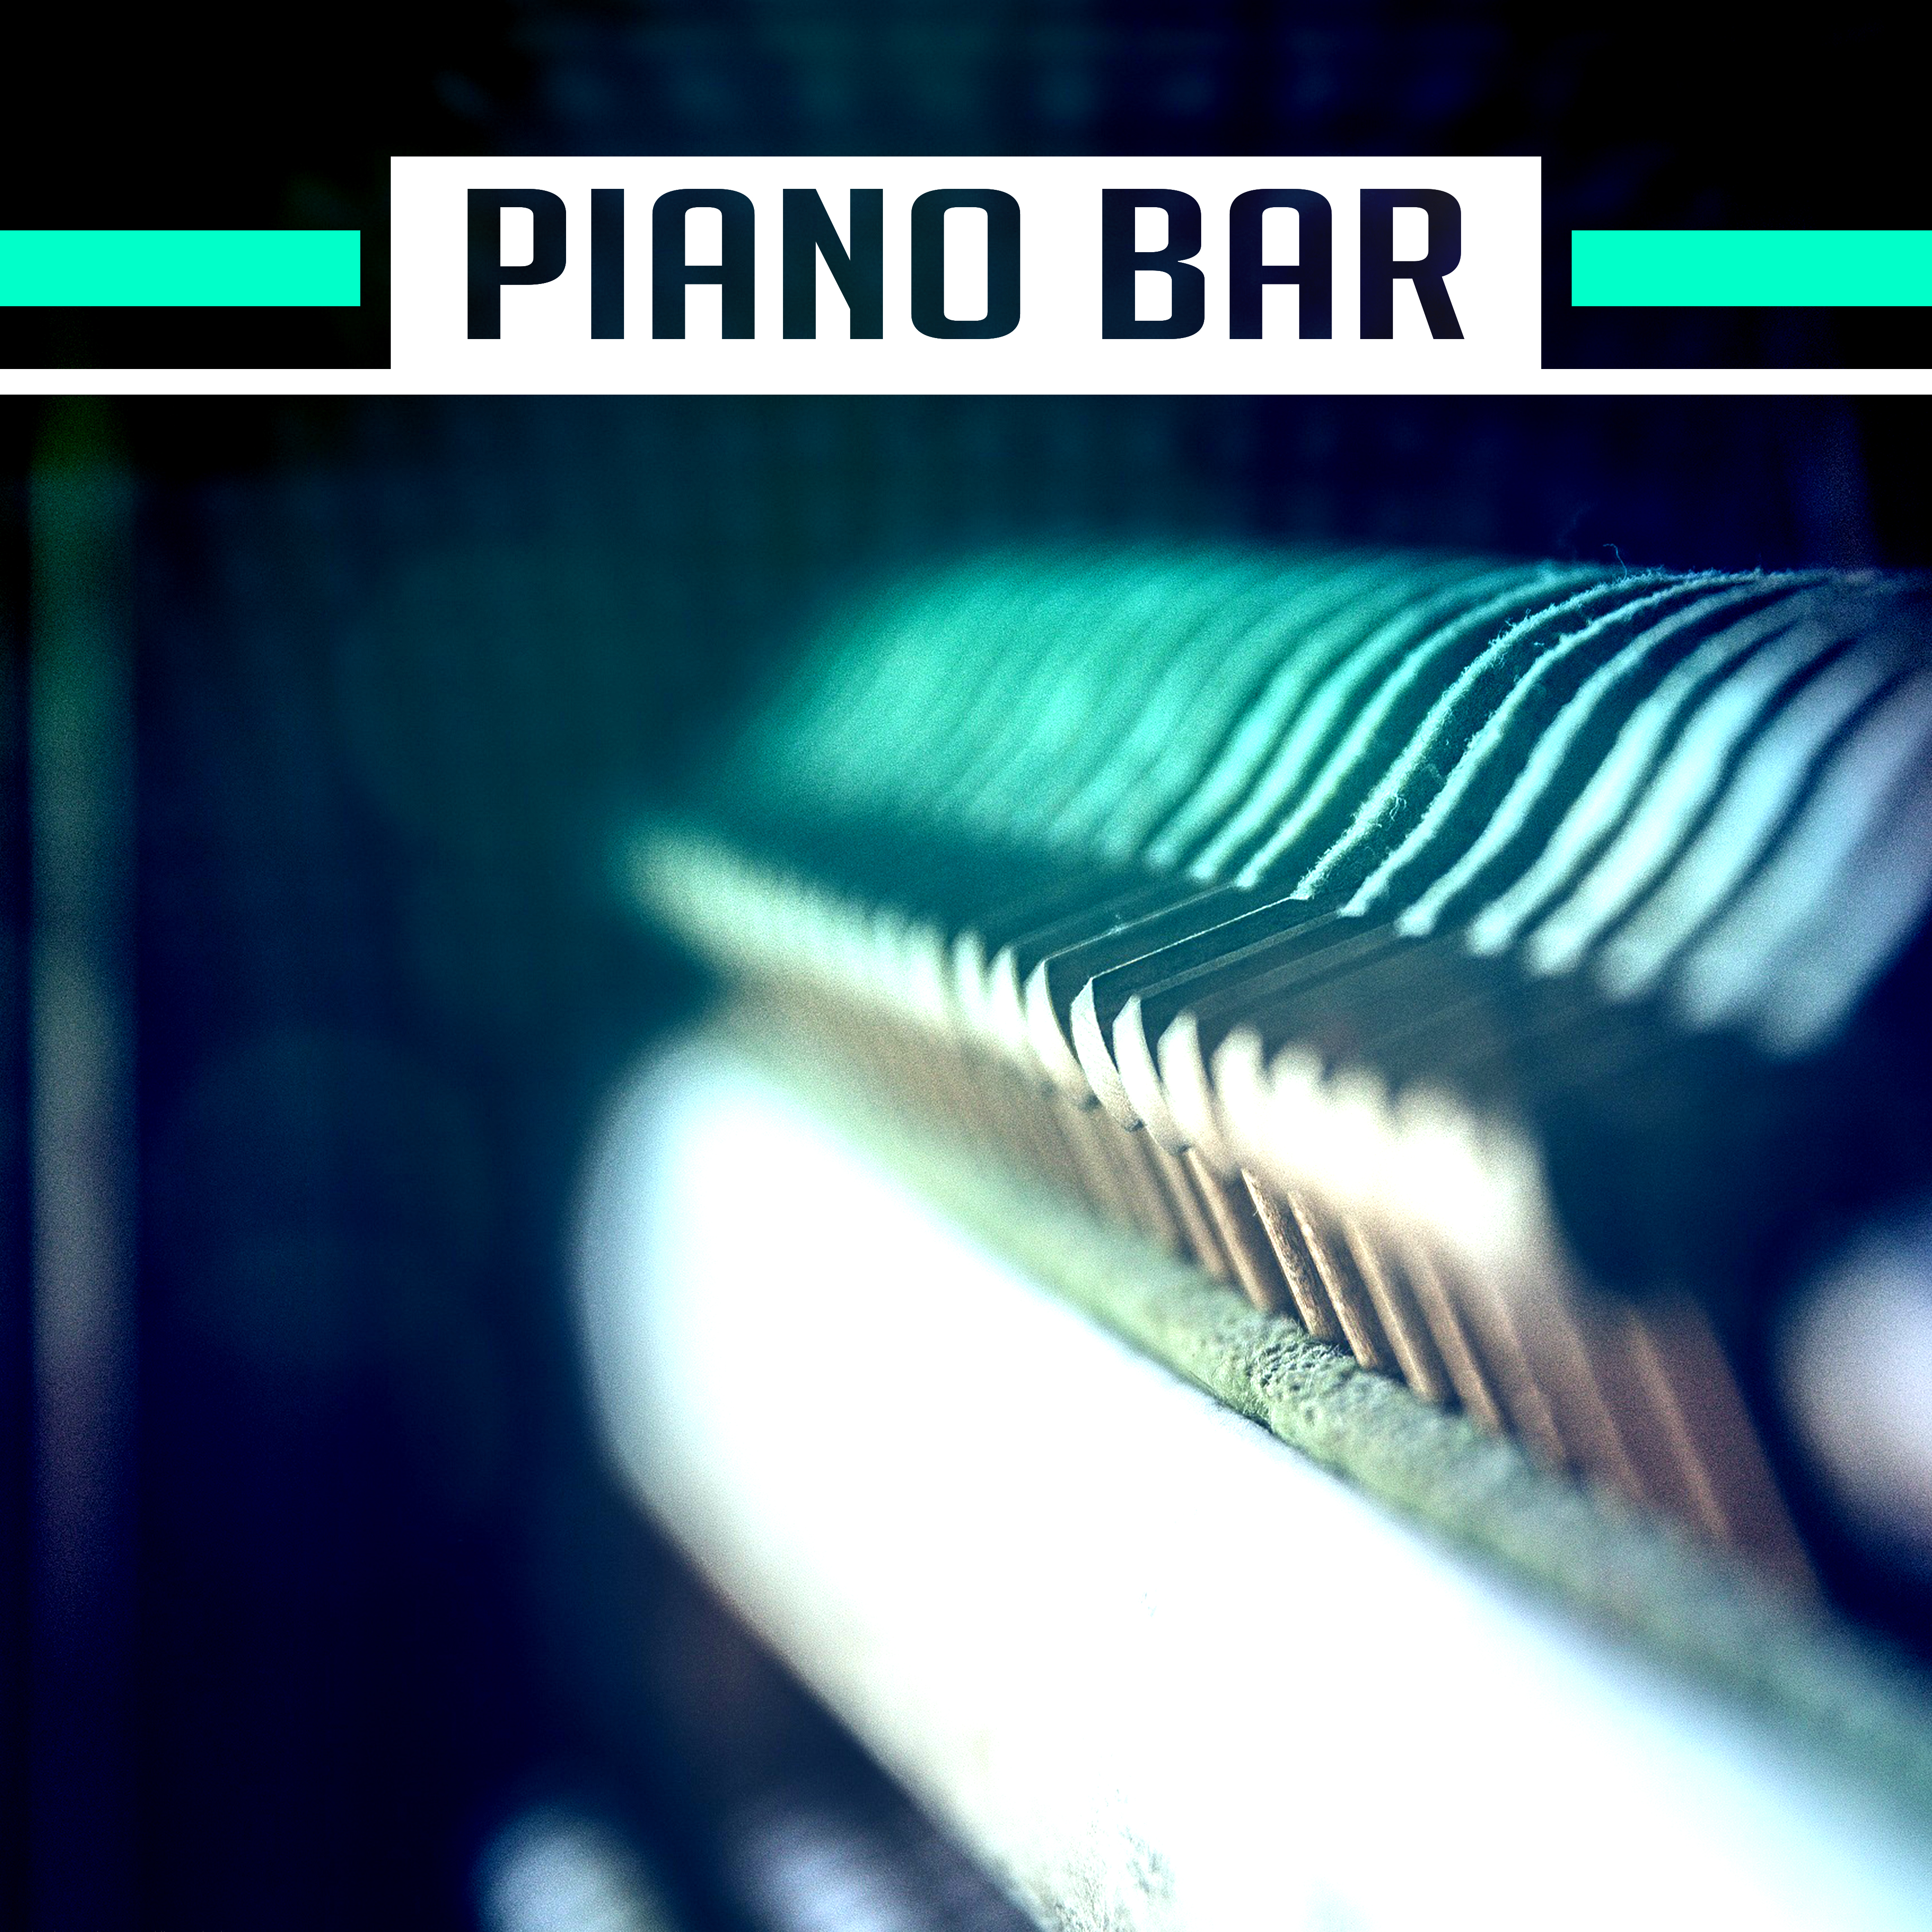 Piano Bar  Restaurant Music, Jazz for Relaxation, Dinner with Family, Coffee Talk, Smooth Jazz, Cocktail Party, Gentle Piano